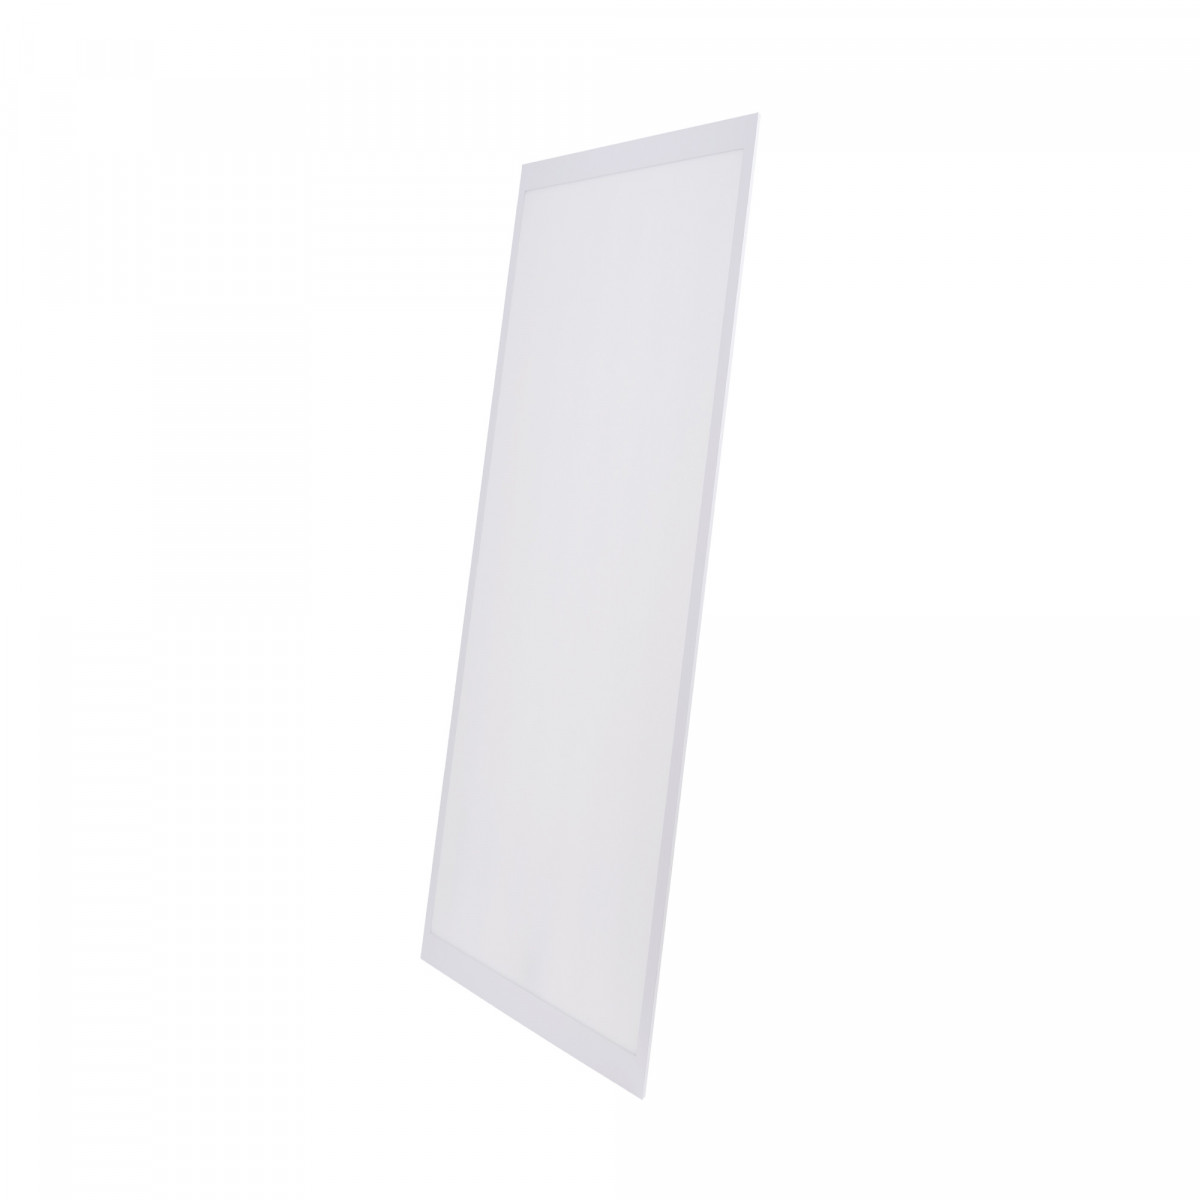 Recessed Backlight LED panel - 120x60cm - 6750lm - Philips driver - 50W - UGR22 - IP40